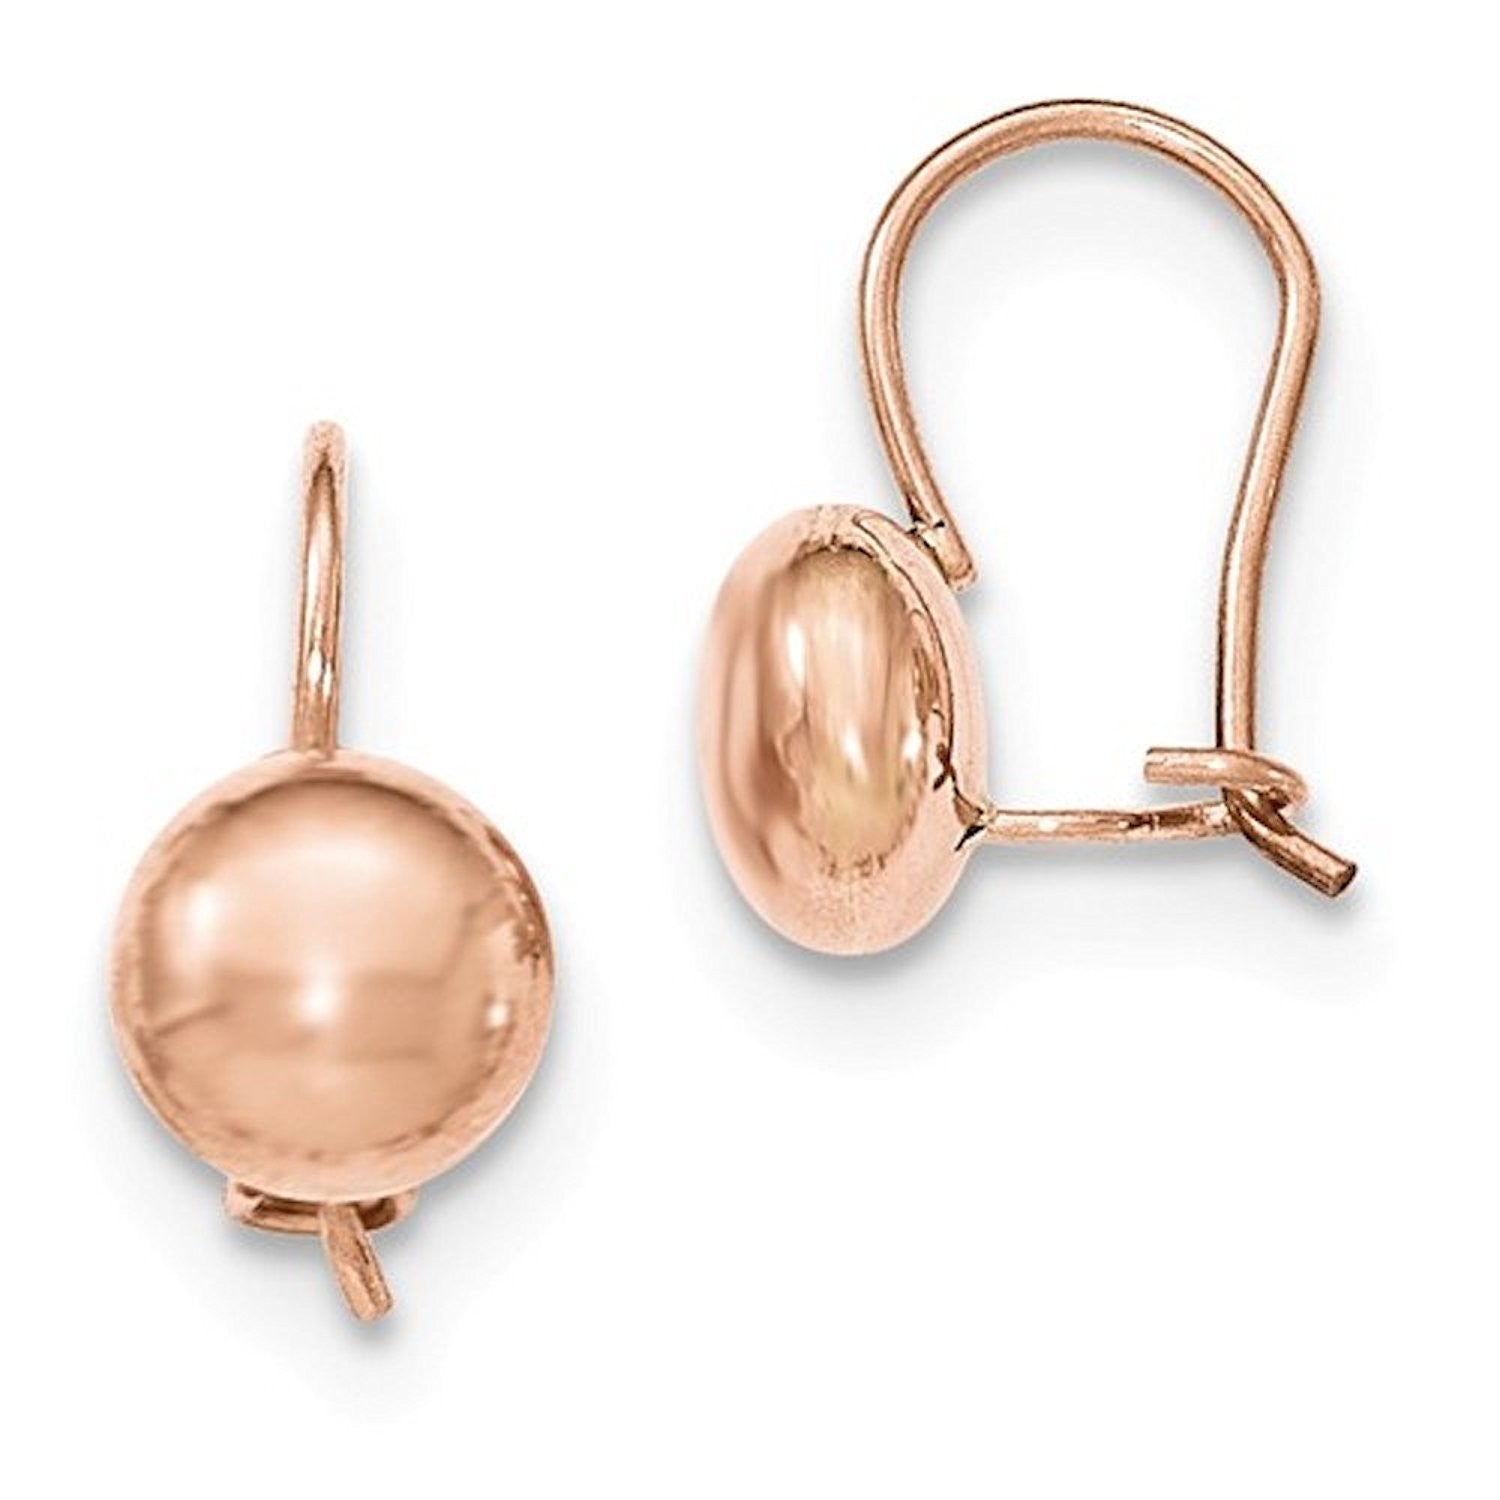 14k Rose Gold Round Button 8mm Kidney Wire Button Earrings